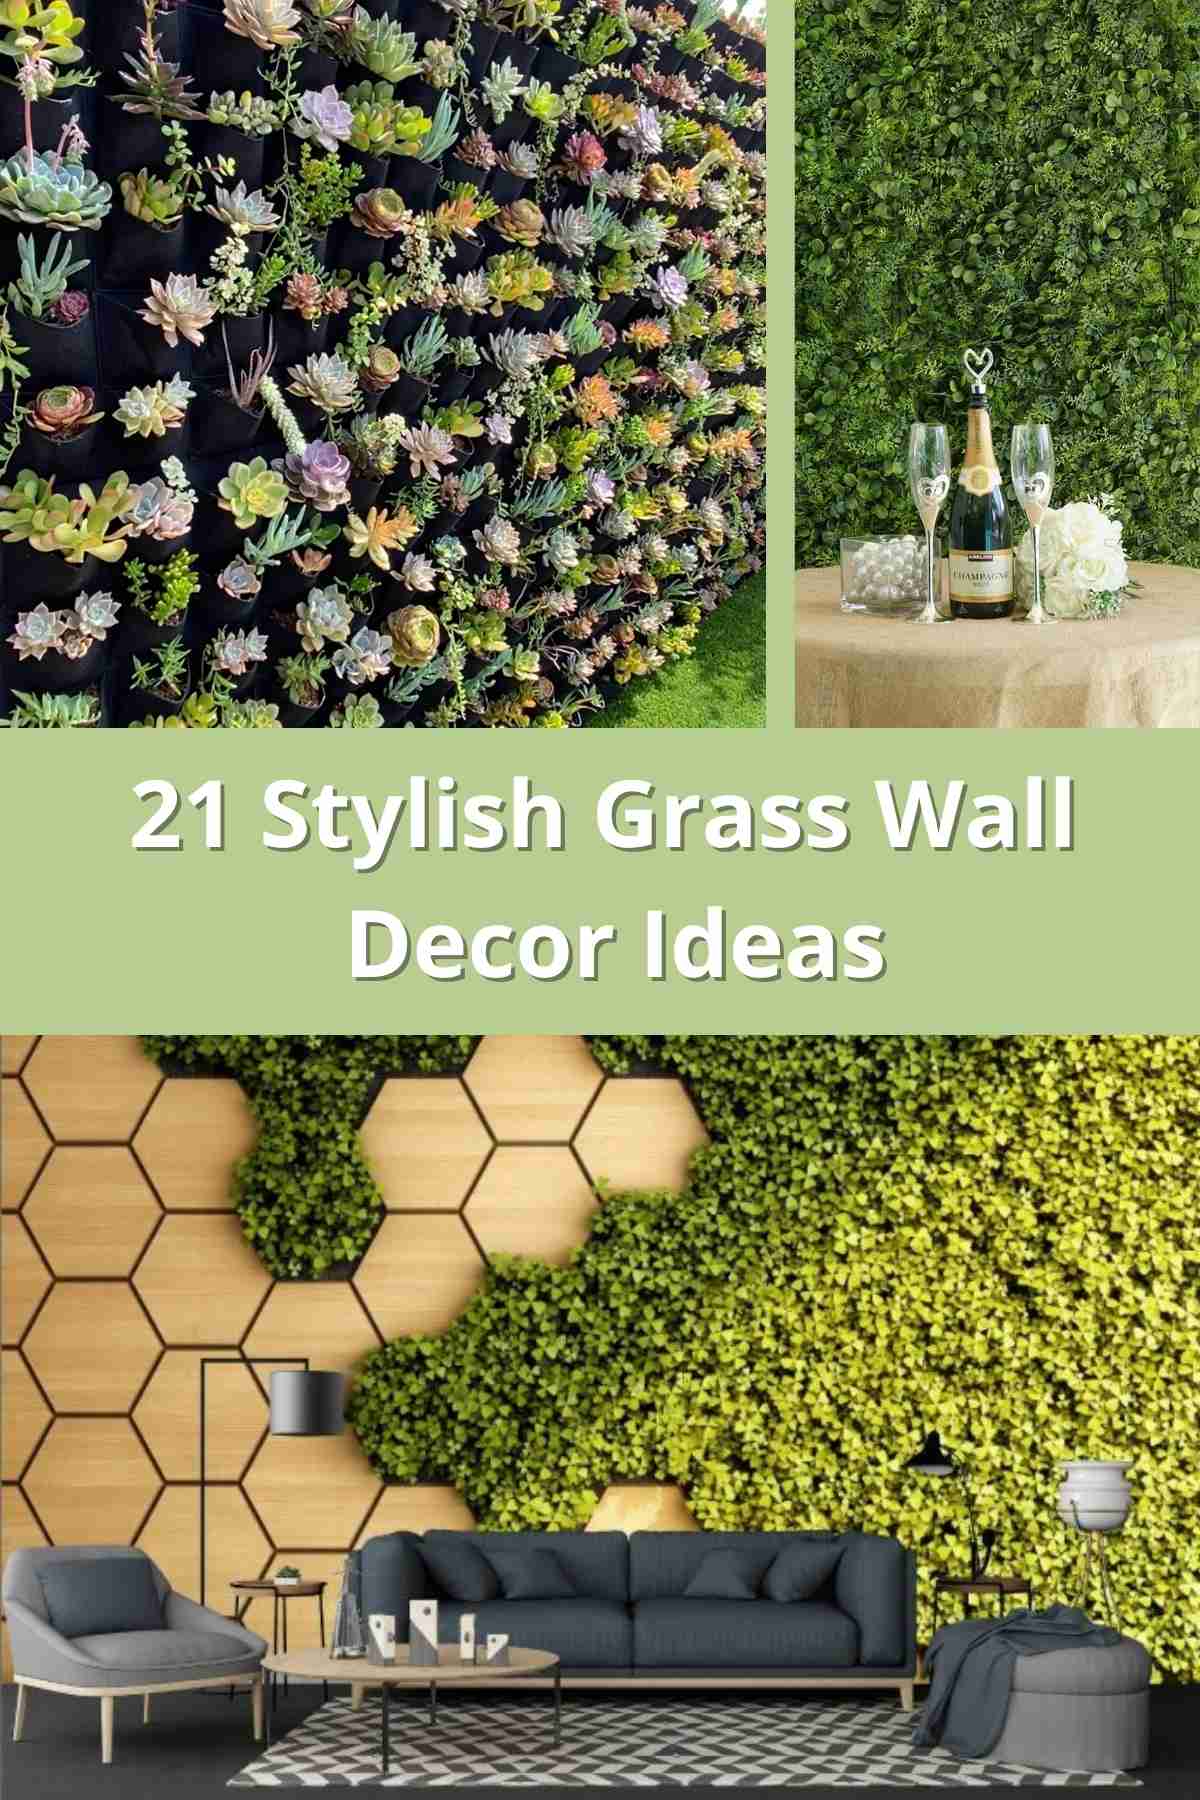 How to build a grass wall